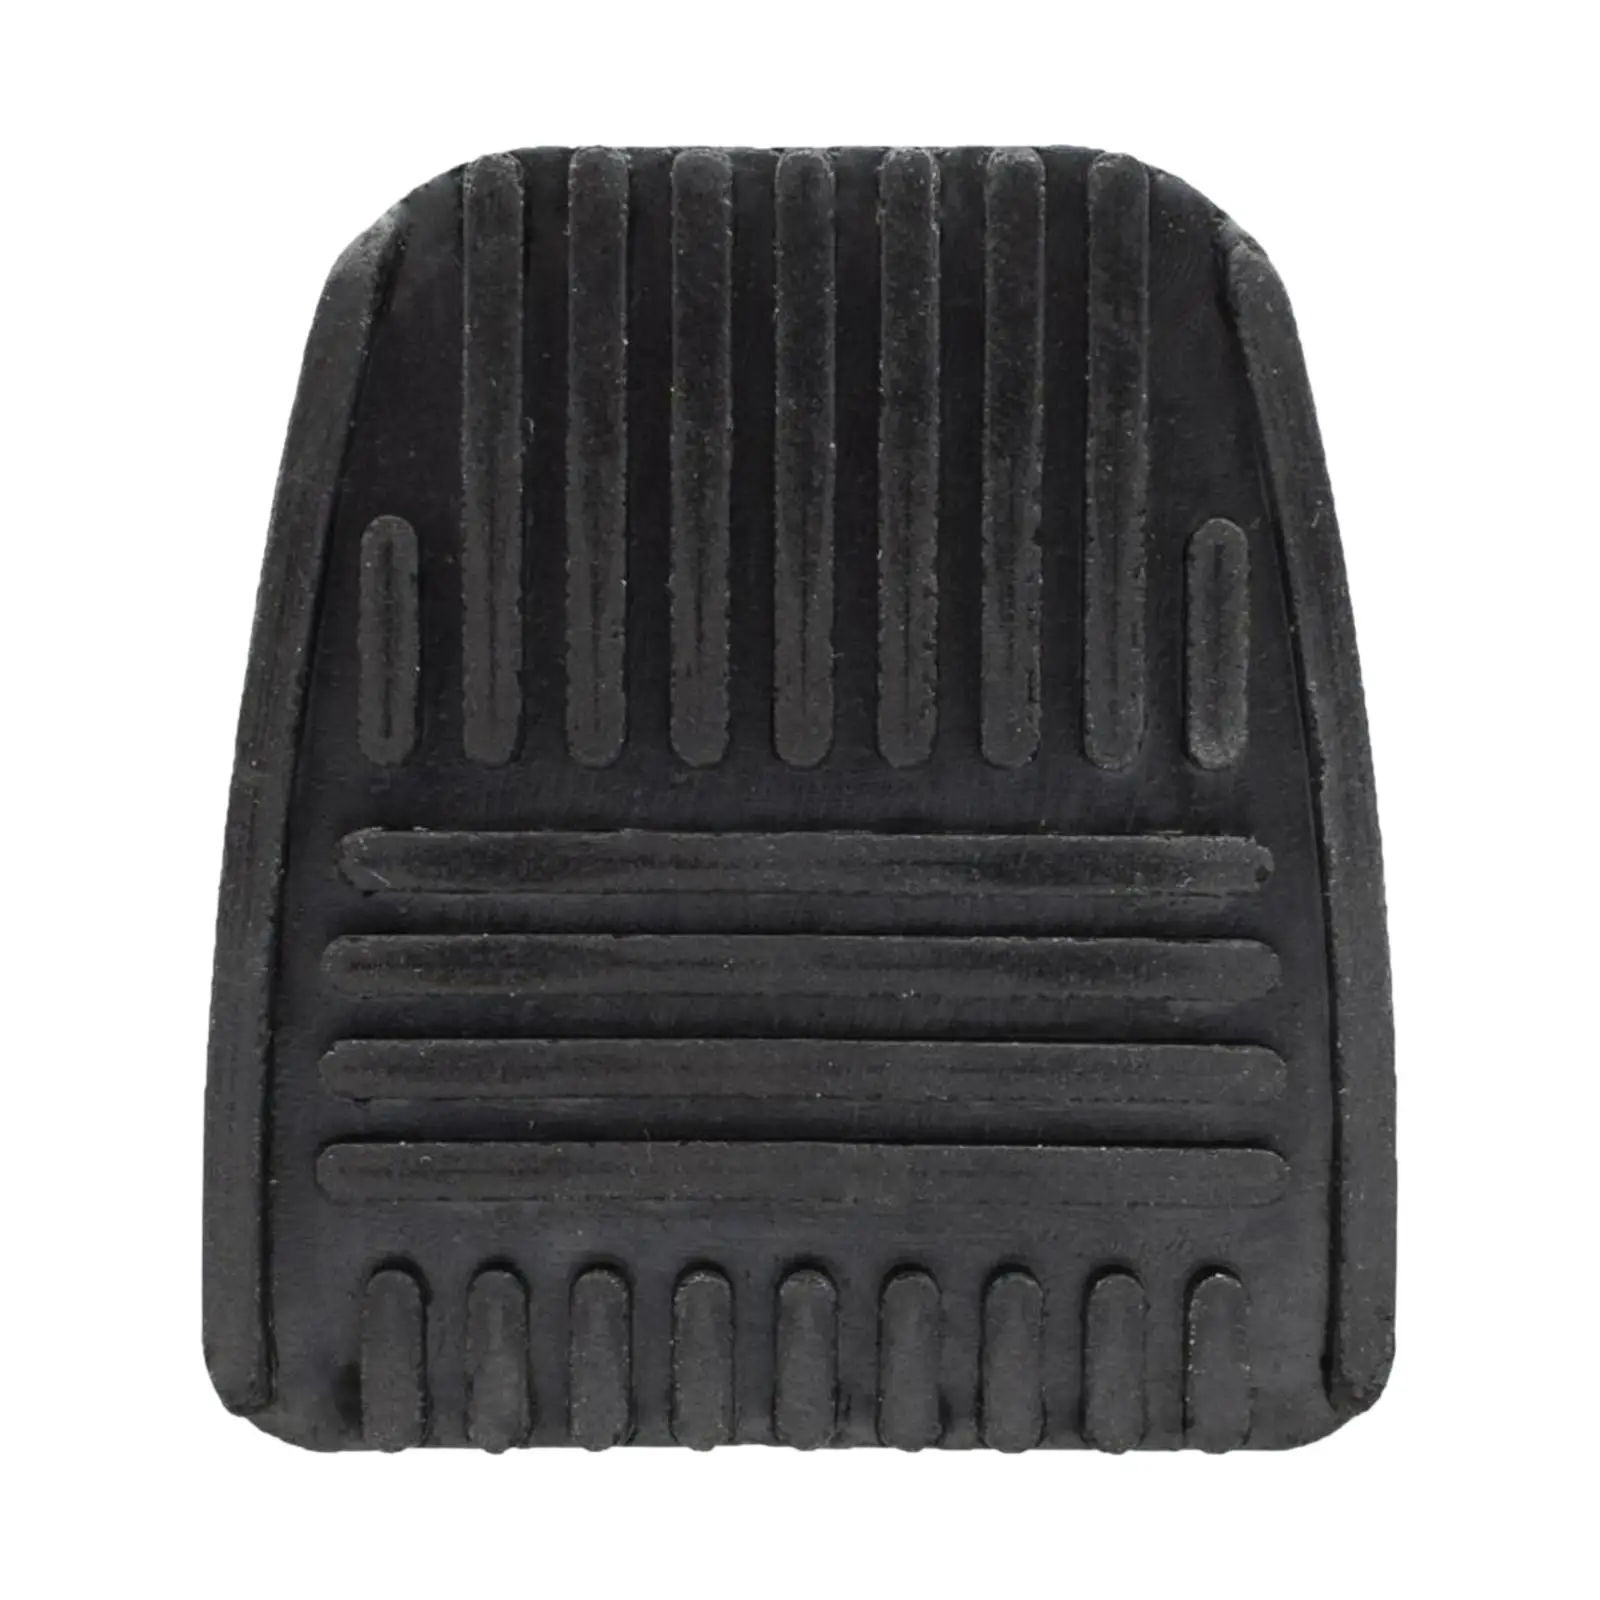 Brake Pedal Pad Replacement 31321-14020 for Toyota for land cruiser Paseo